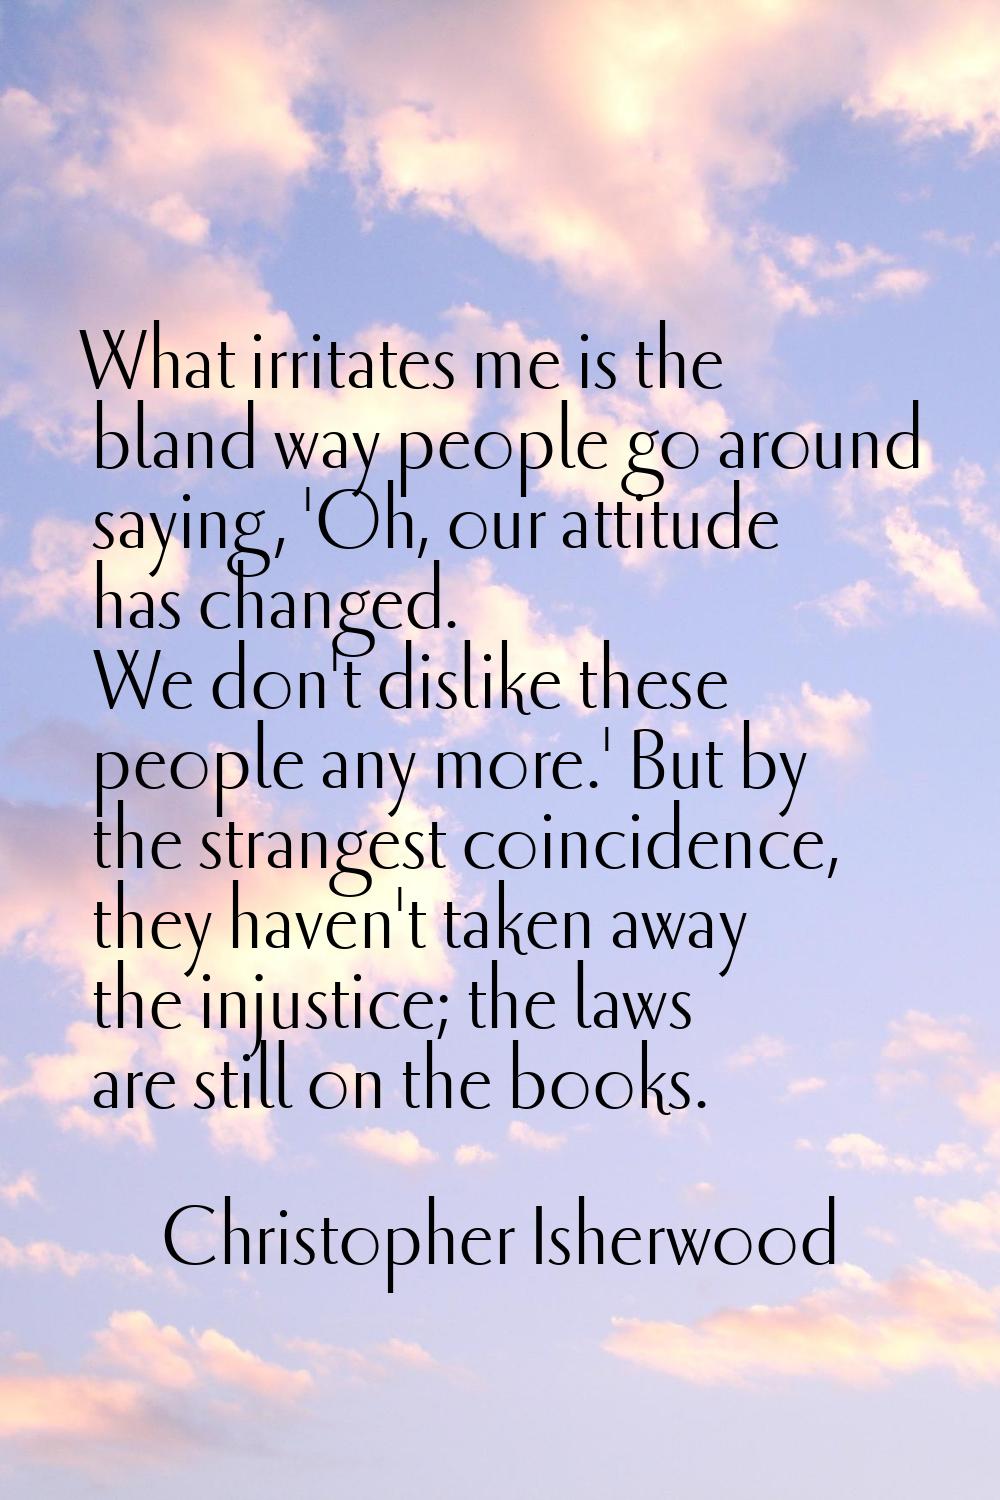 What irritates me is the bland way people go around saying, 'Oh, our attitude has changed. We don't